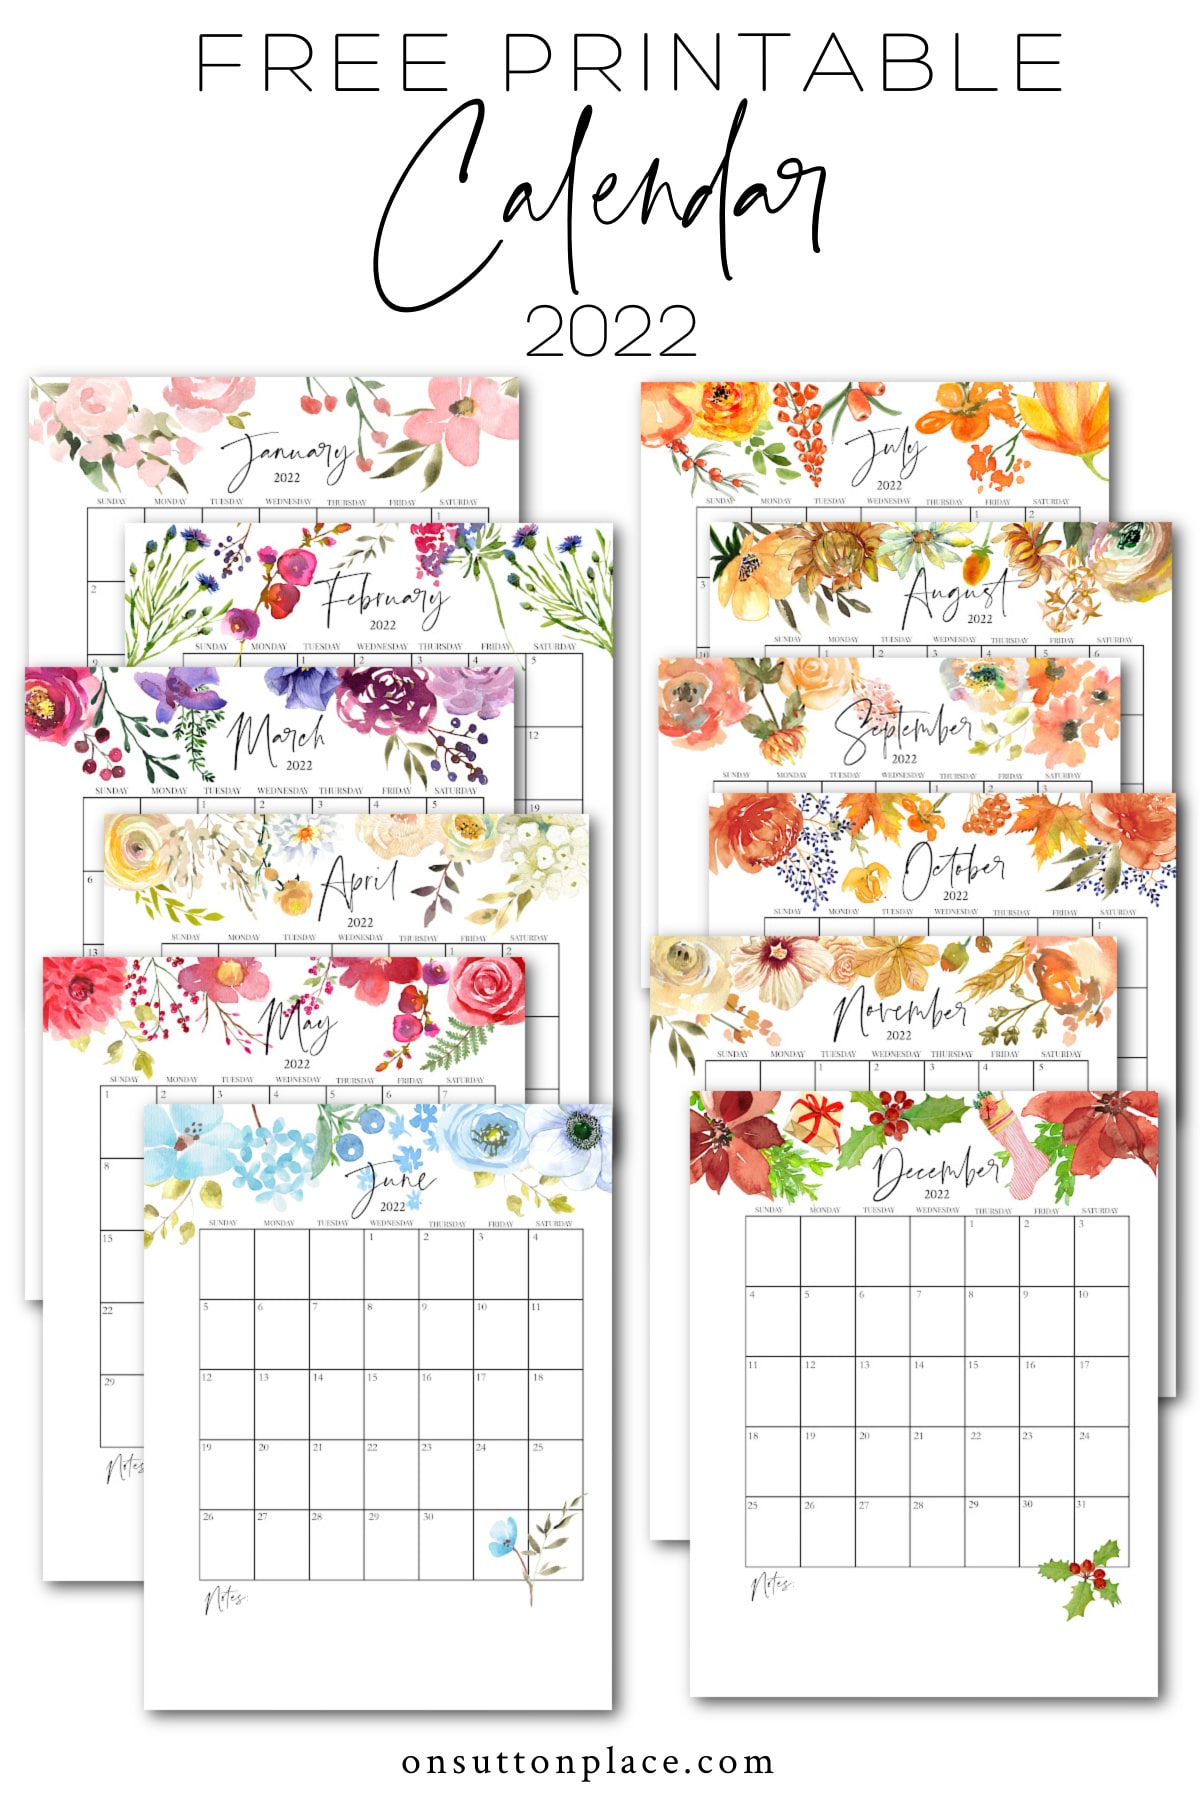 Free Printable Calendar For 2022 50+ Of The Best 2022 Free Printable Calendars - The Turquoise Home